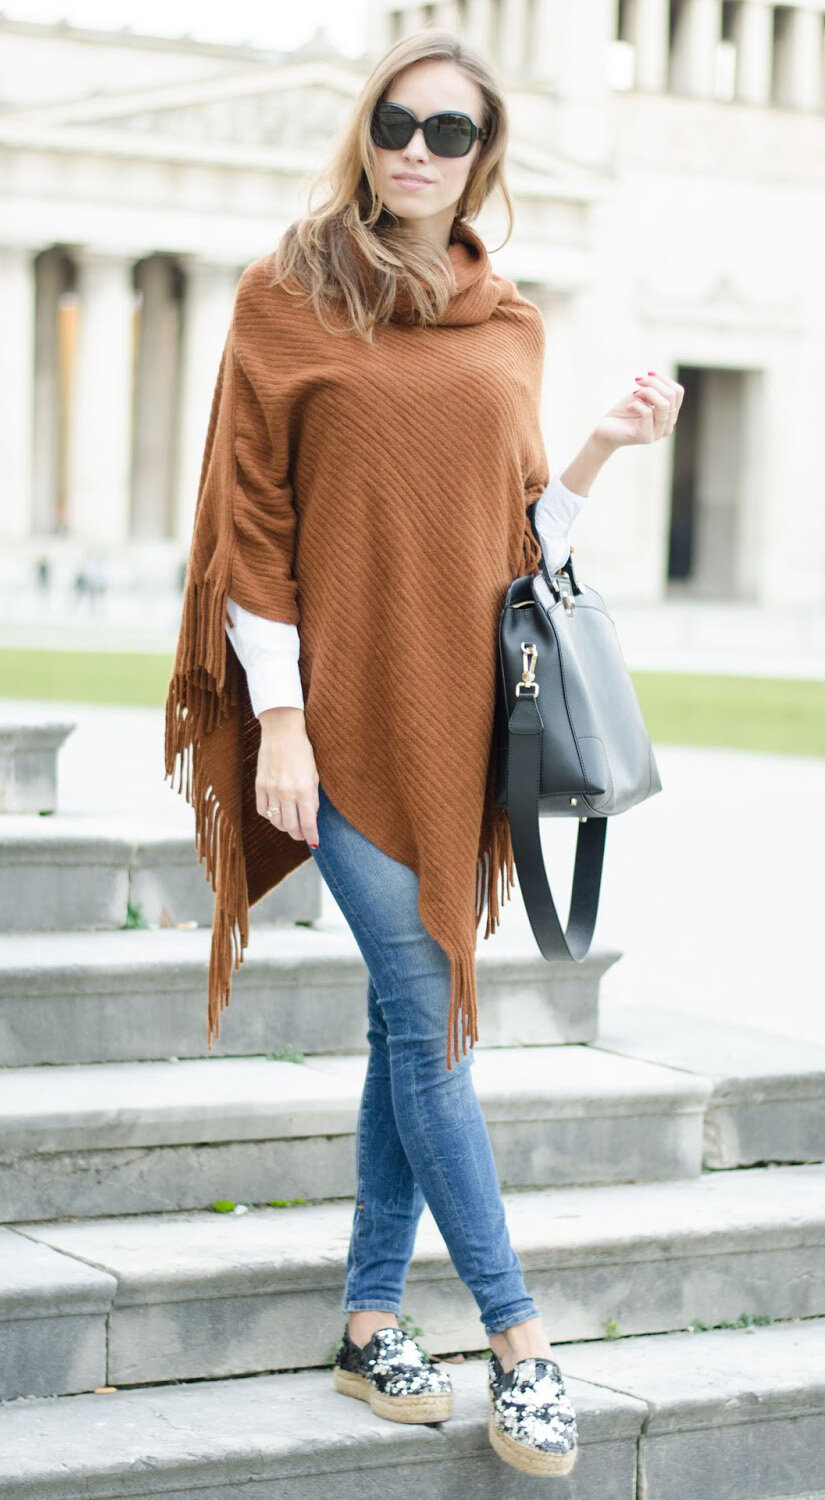 blue-med-skinny-jeans-white-collared-shirt-camel-sweater-poncho-hairr-sun-black-bag-fall-winter-weekend.jpg